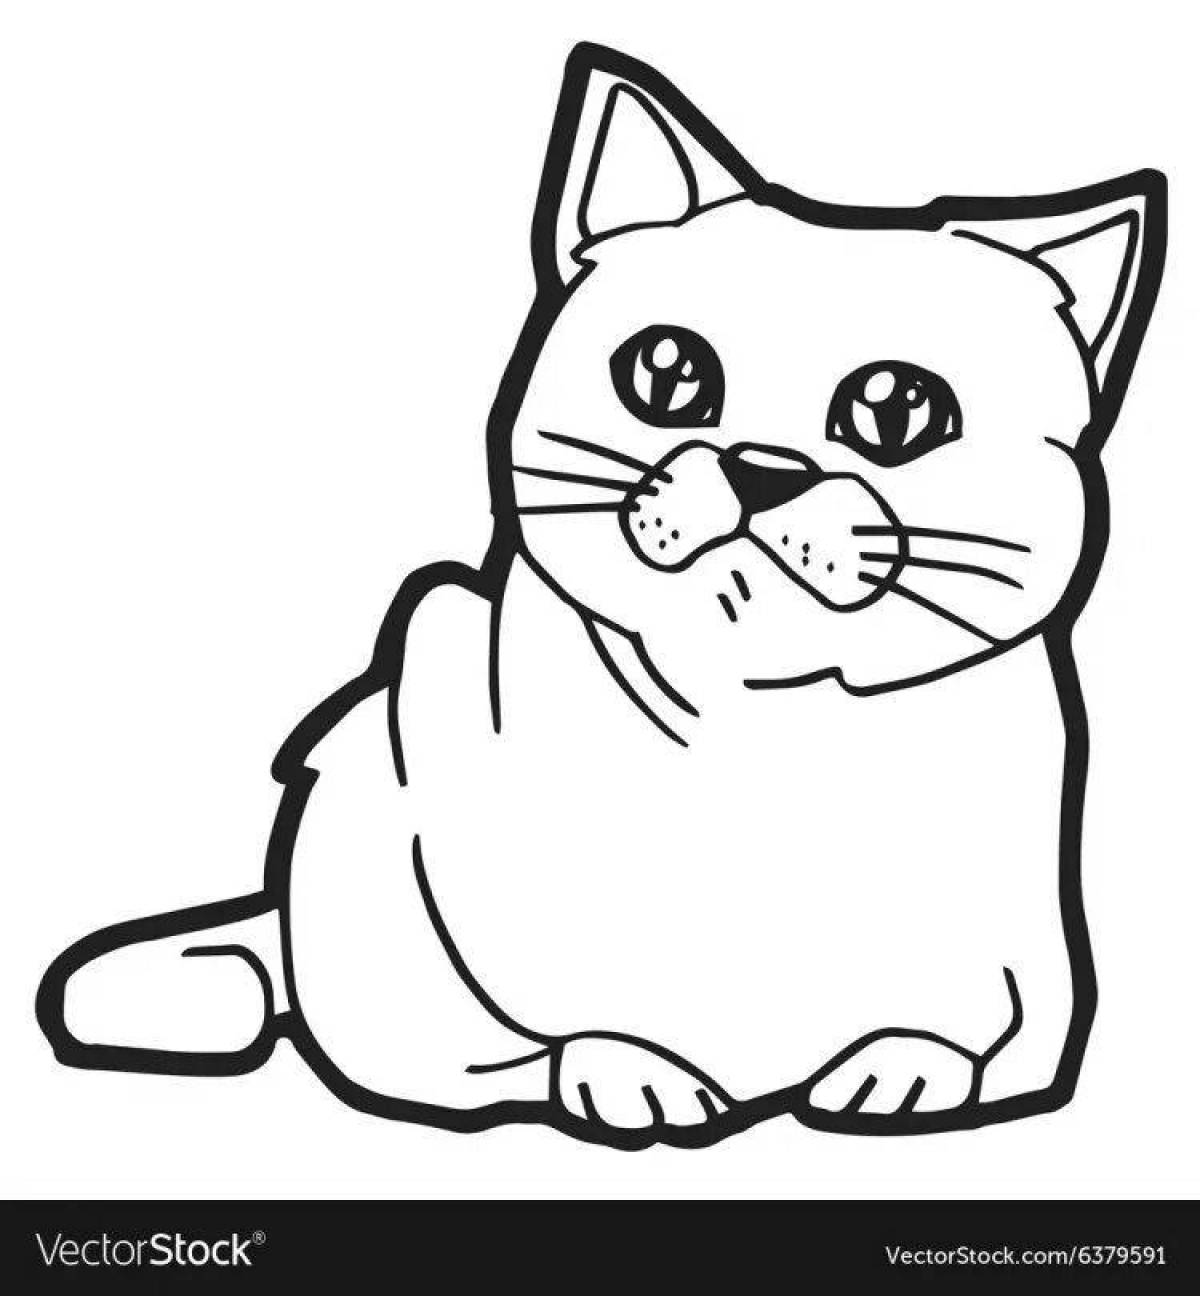 Coloring page graceful british cat